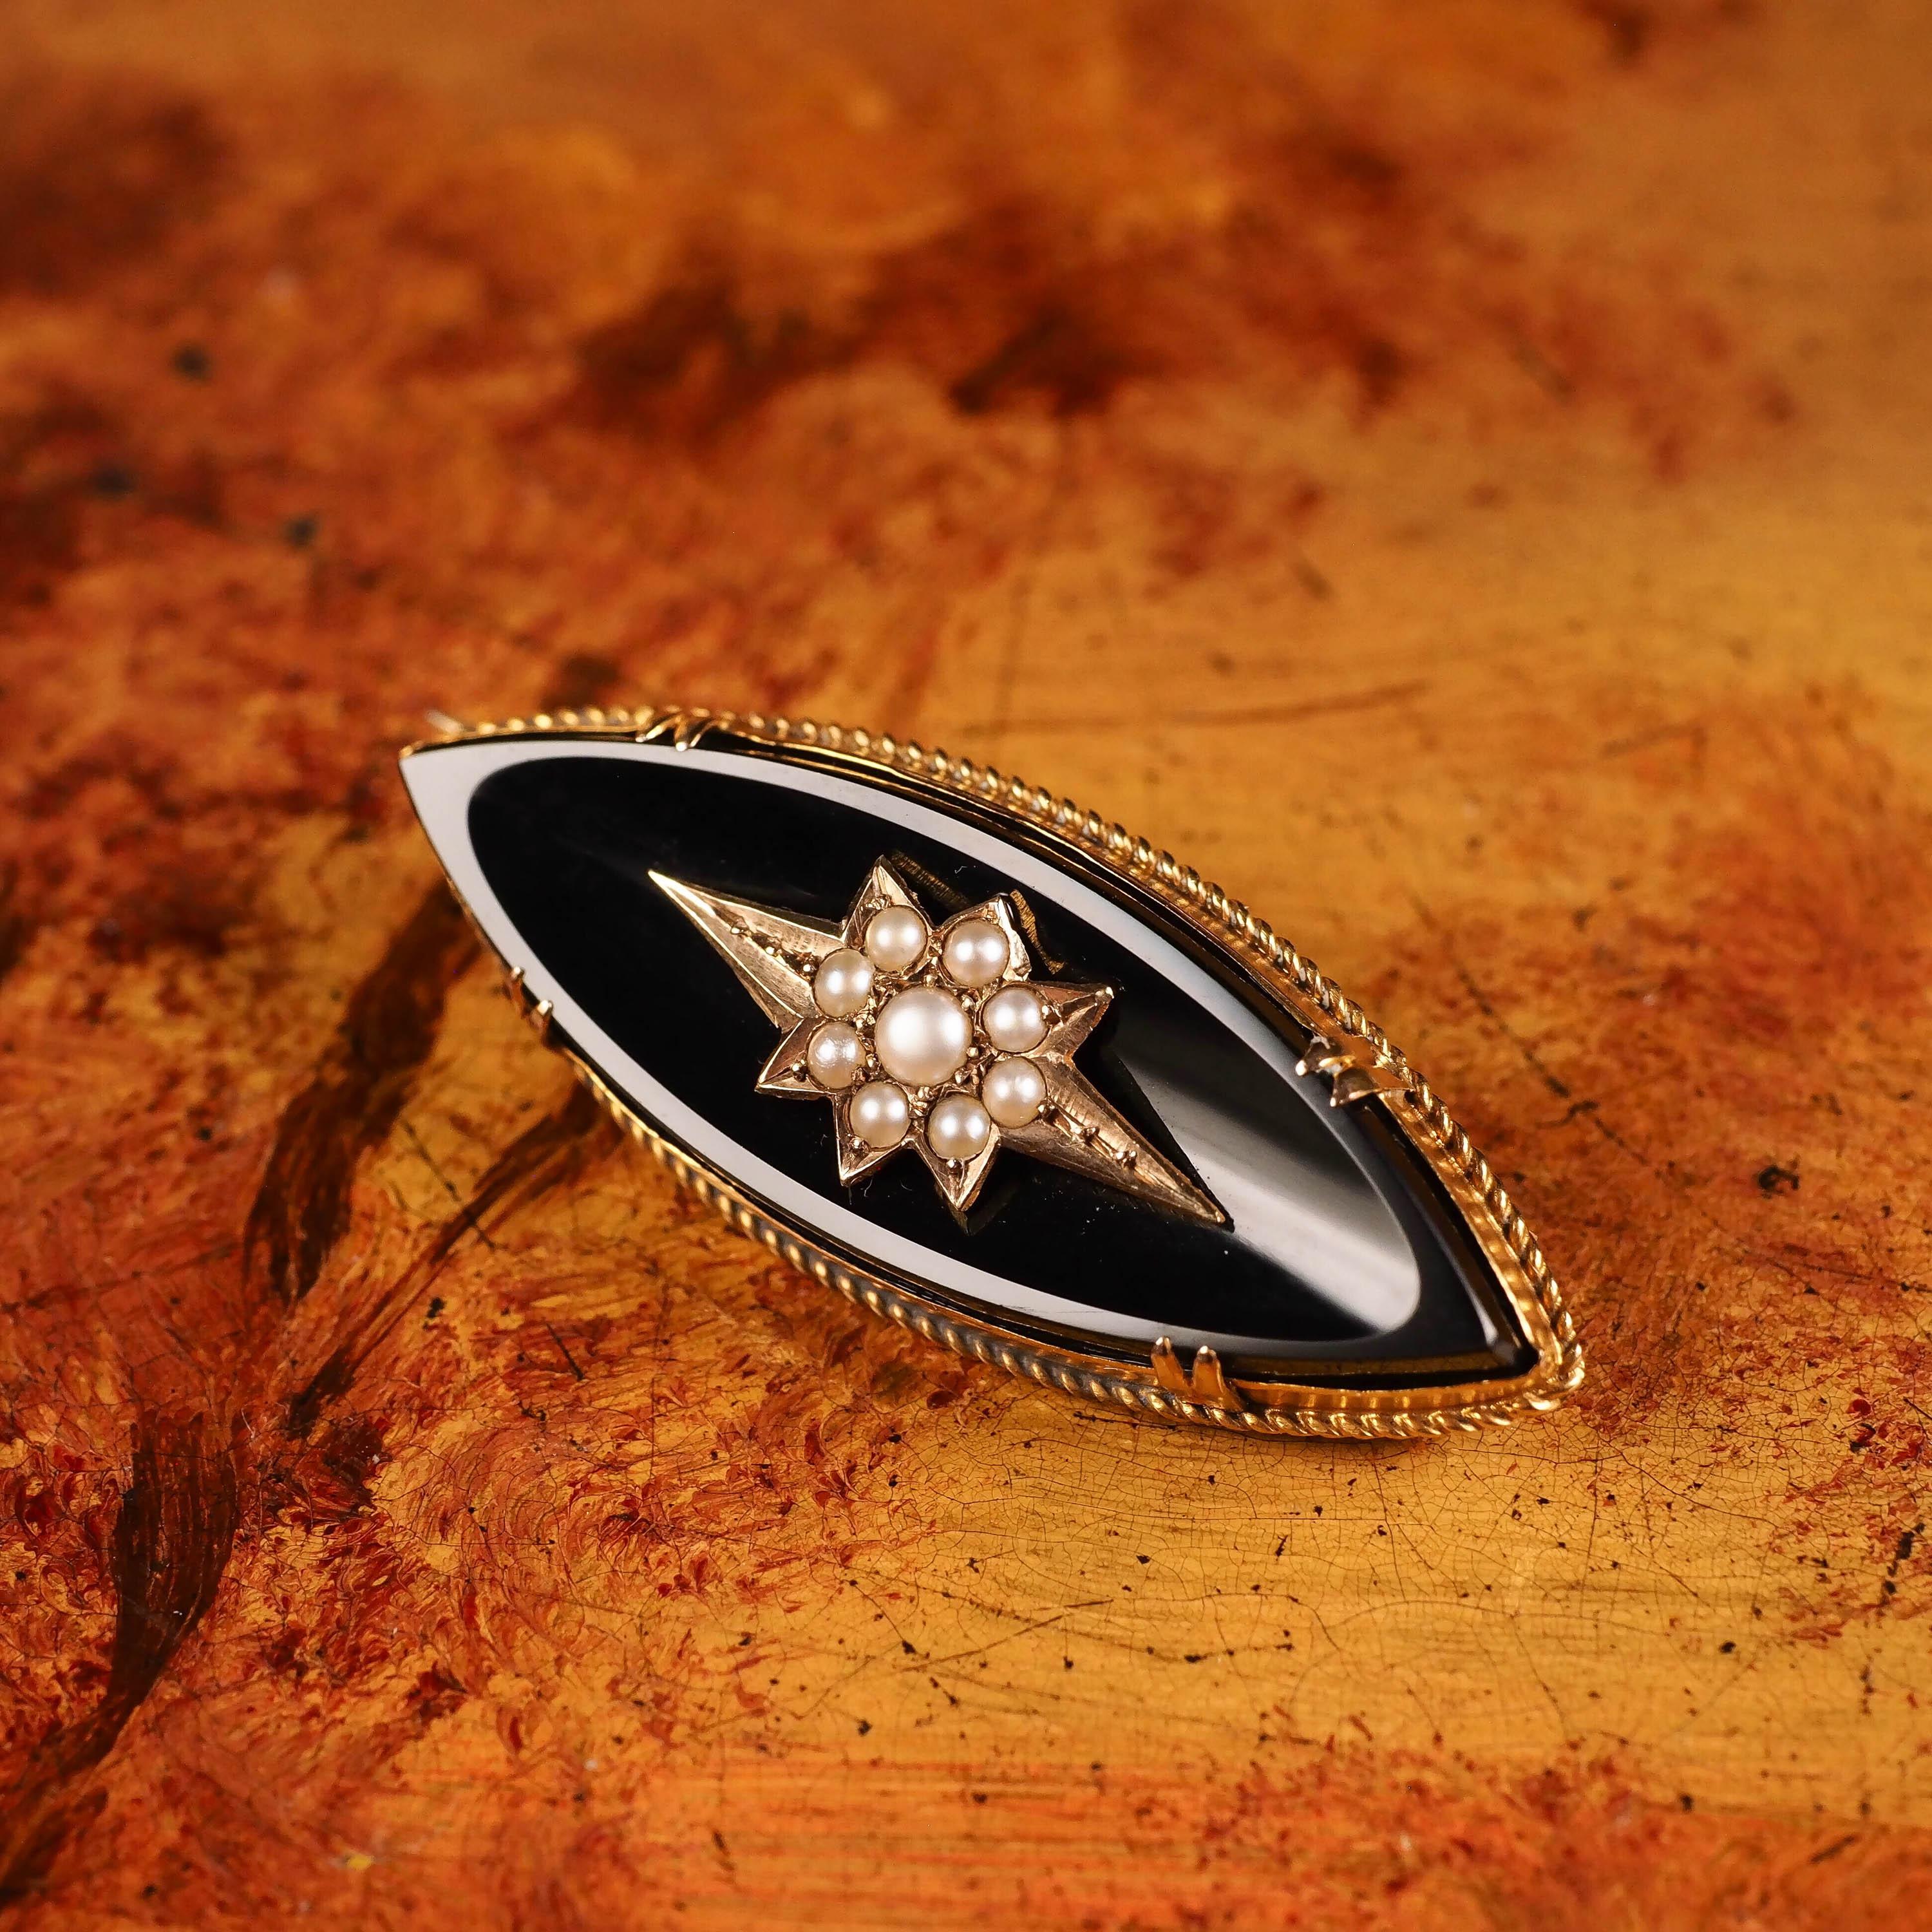 We are delighted to offer this stylish antique Victorian 18K gold brooch. The brooch features a large marquise-shaped onyx with 18K gold mounting.

The central portion presents a fabulous star-shaped gold cartouche with 9 seed pearls intricately set